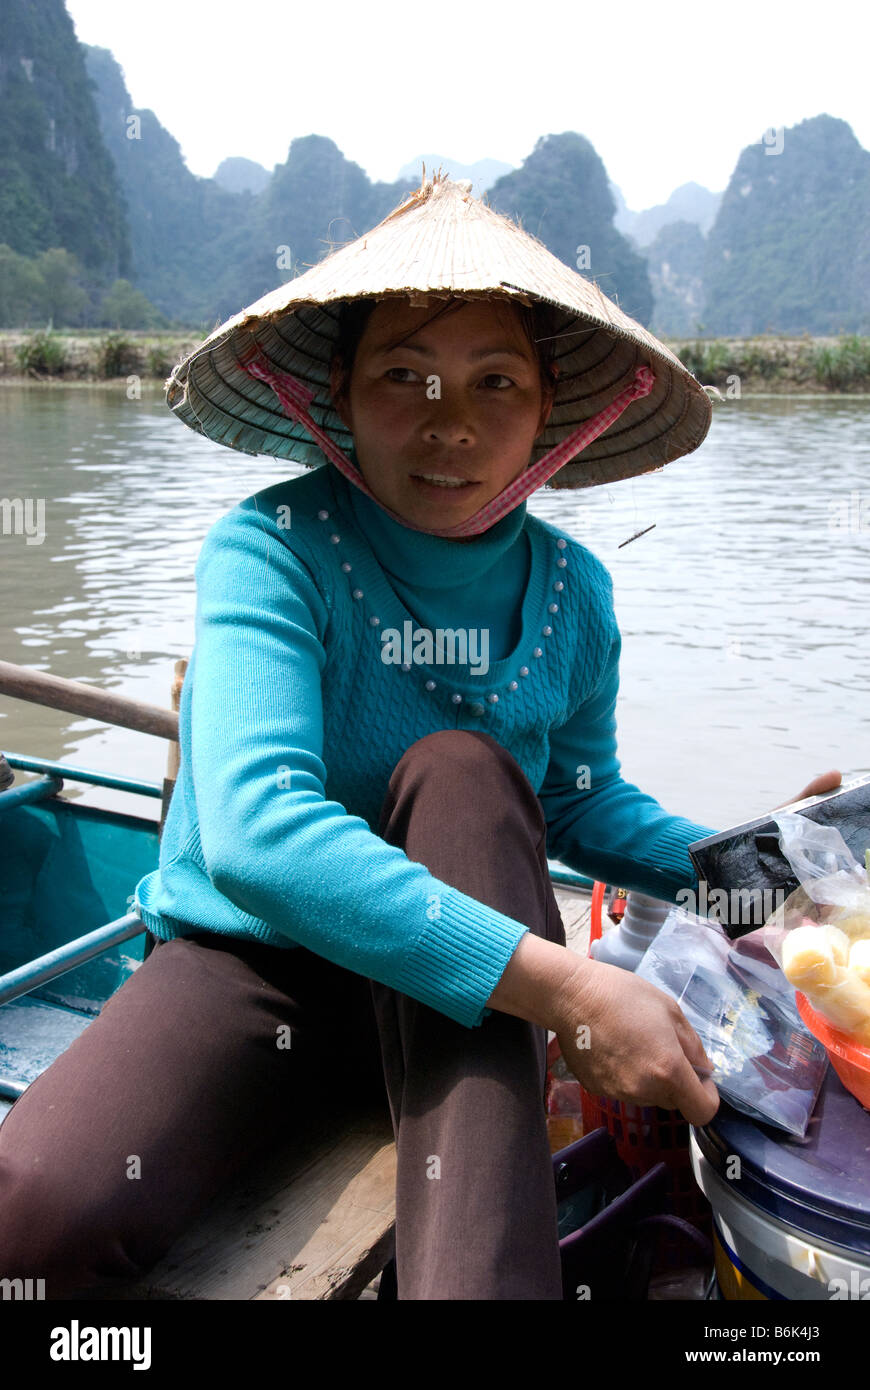 A vendor of fruit and drinks on the Ngo Dong River, Tam Coc, Vietnam Stock Photo